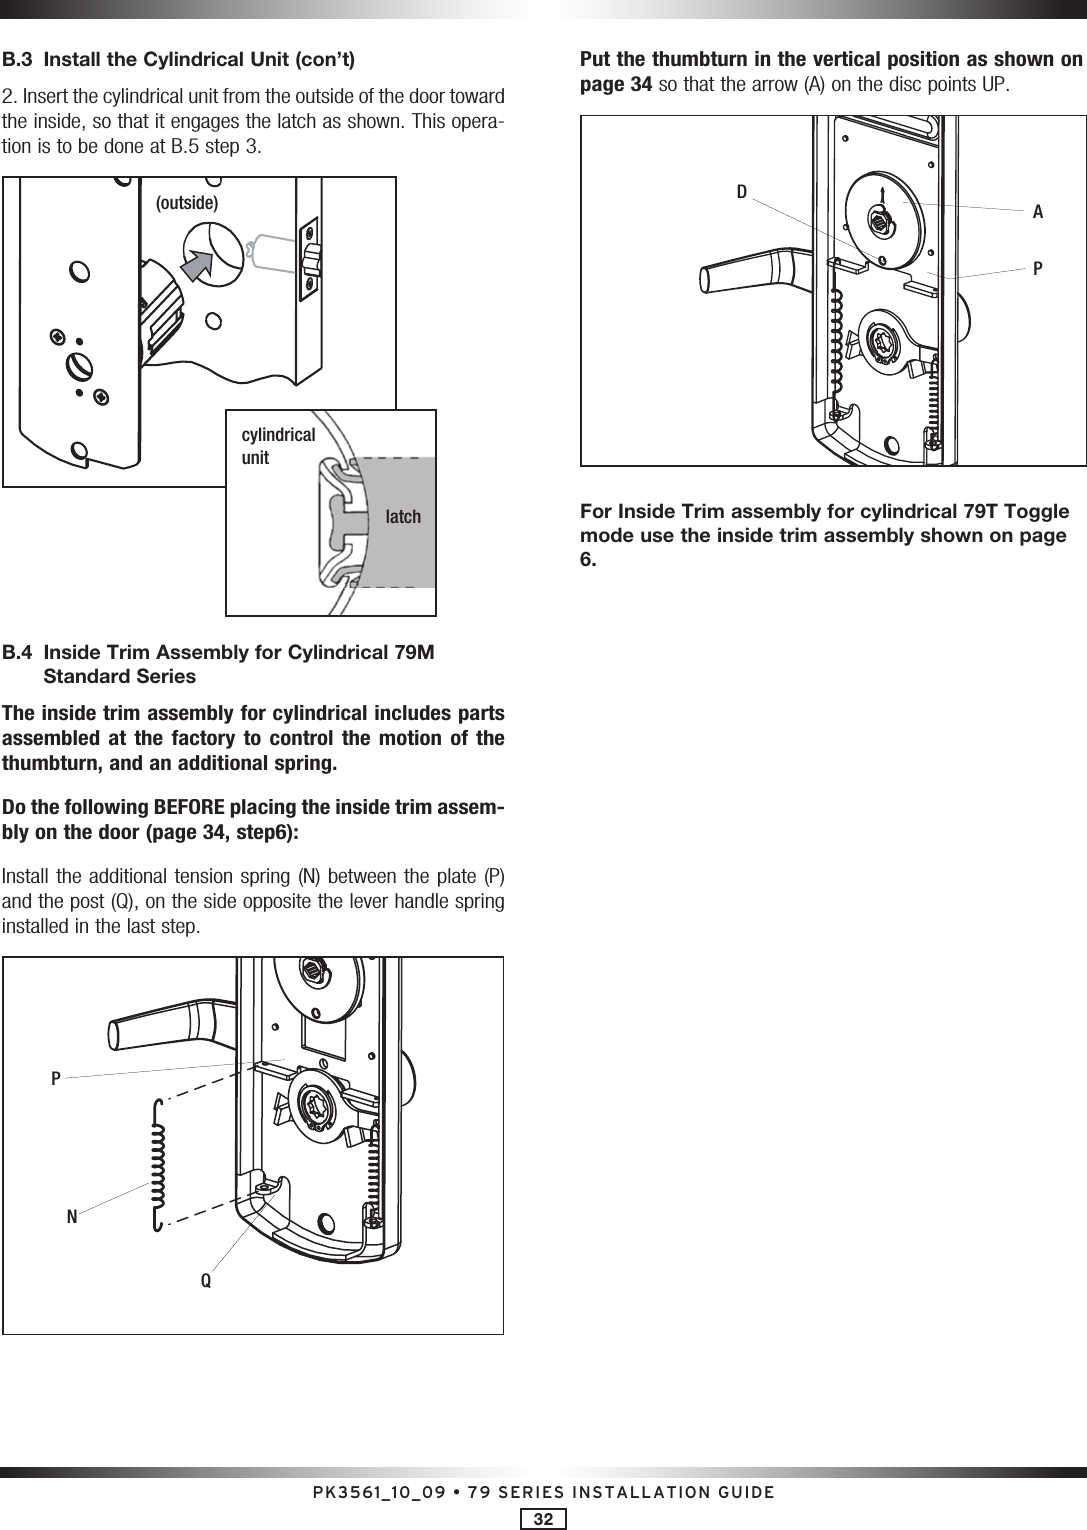 PK3561_10_09 • 79 SERIES INSTALLATION GUIDE32B.3  Install the Cylindrical Unit (con’t) 2. Insert the cylindrical unit from the outside of the door toward the inside, so that it engages the latch as shown. This opera-tion is to be done at B.5 step 3.(outside)cylindrical unitlatchB.4   Inside Trim Assembly for Cylindrical 79M Standard SeriesThe inside trim assembly for cylindrical includes parts assembled  at  the  factory  to  control  the  motion  of  the thumbturn, and an additional spring. Do the following BEFORE placing the inside trim assem-bly on the door (page 34, step6):Install the additional tension spring (N) between the plate (P) and the post (Q), on the side opposite the lever handle spring installed in the last step. NQPPut the thumbturn in the vertical position as shown on page 34 so that the arrow (A) on the disc points UP. VWDAP For Inside Trim assembly for cylindrical 79T Toggle mode use the inside trim assembly shown on page 6.